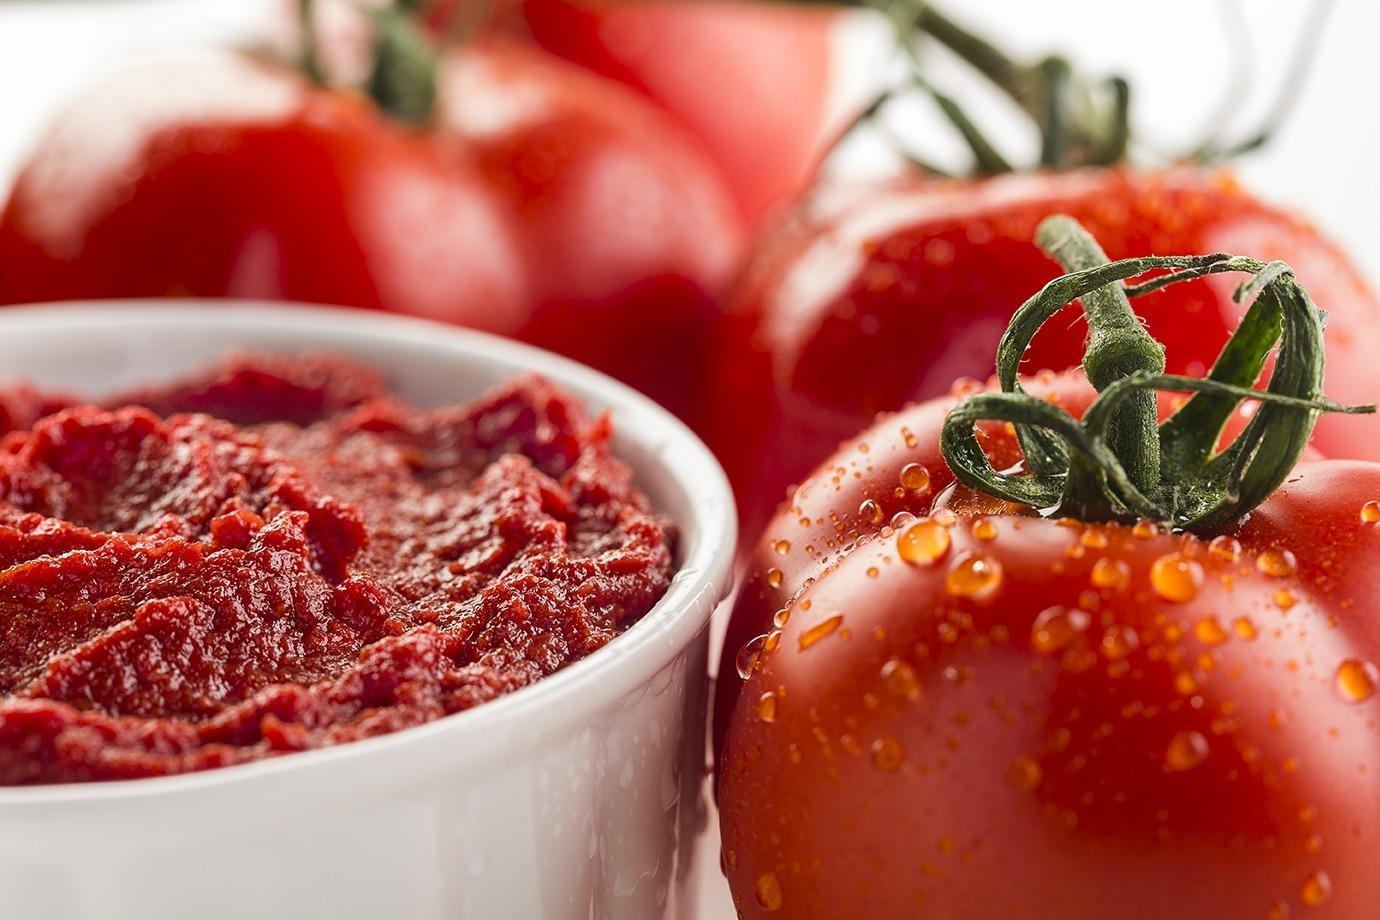 Bank of Industry Set to Drive Local Tomato Paste Production